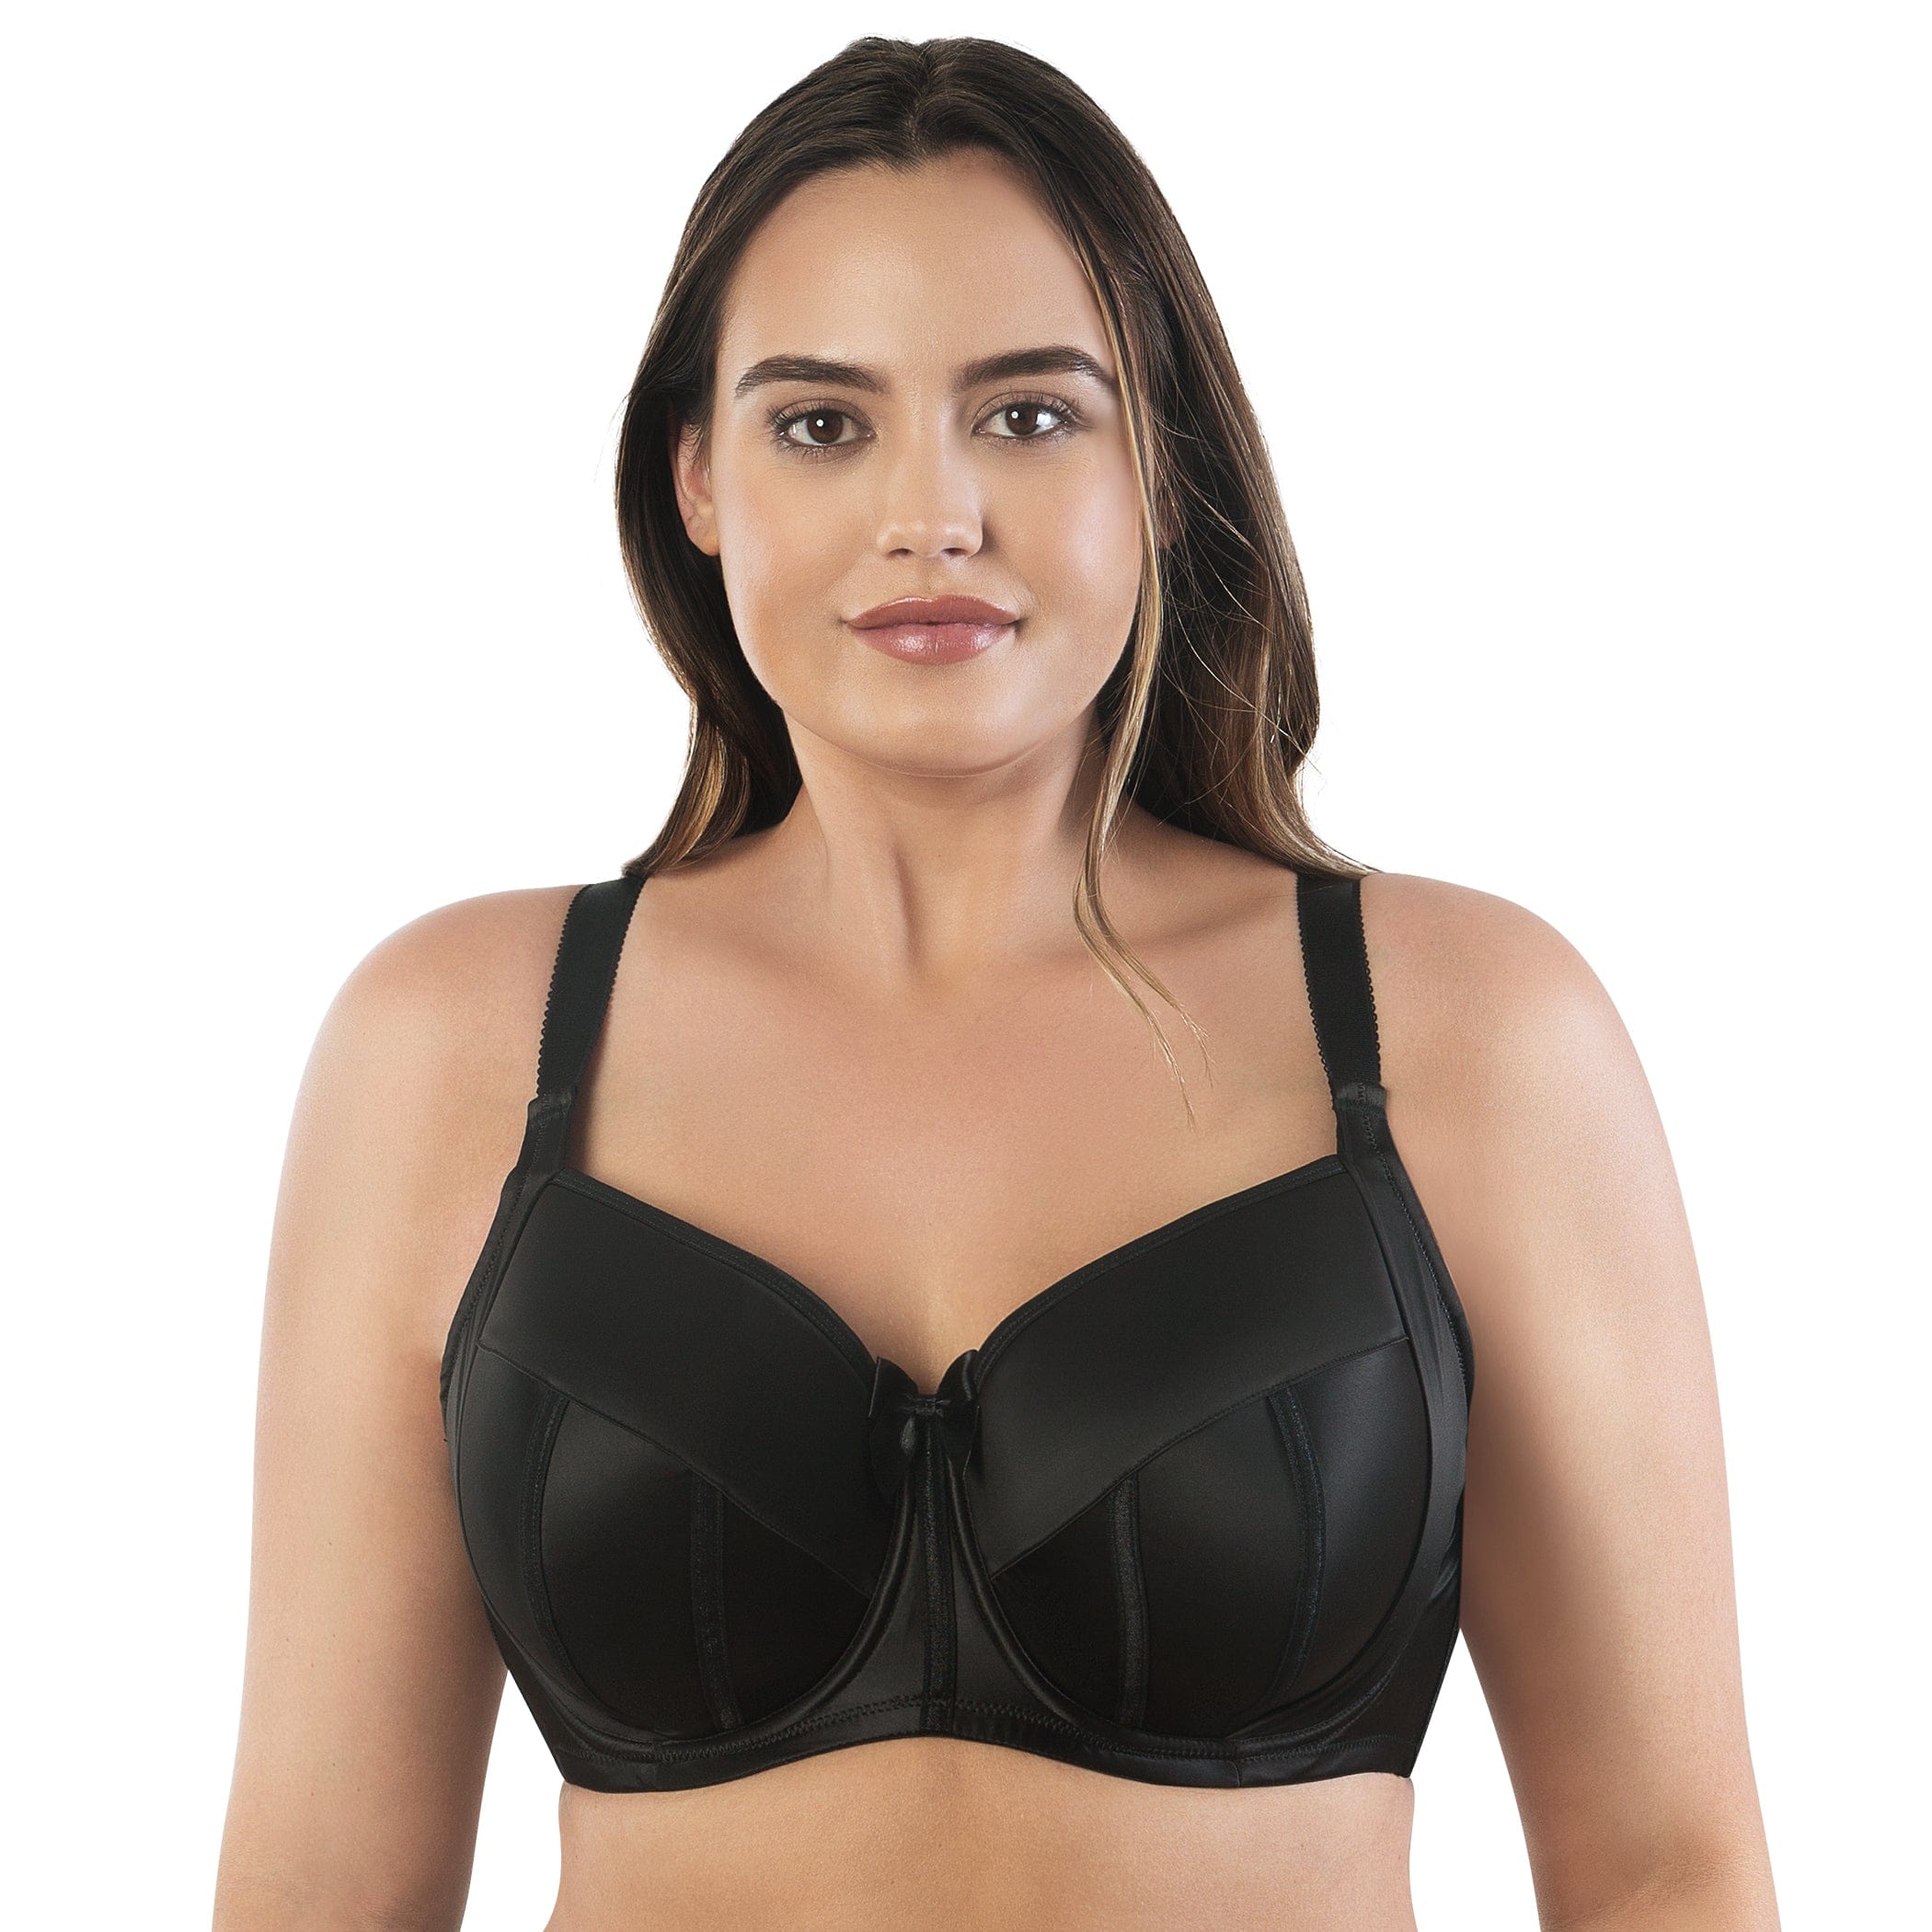 Where to Buy Good Bras Locally: Tips and Tricks - ParfaitLingerie